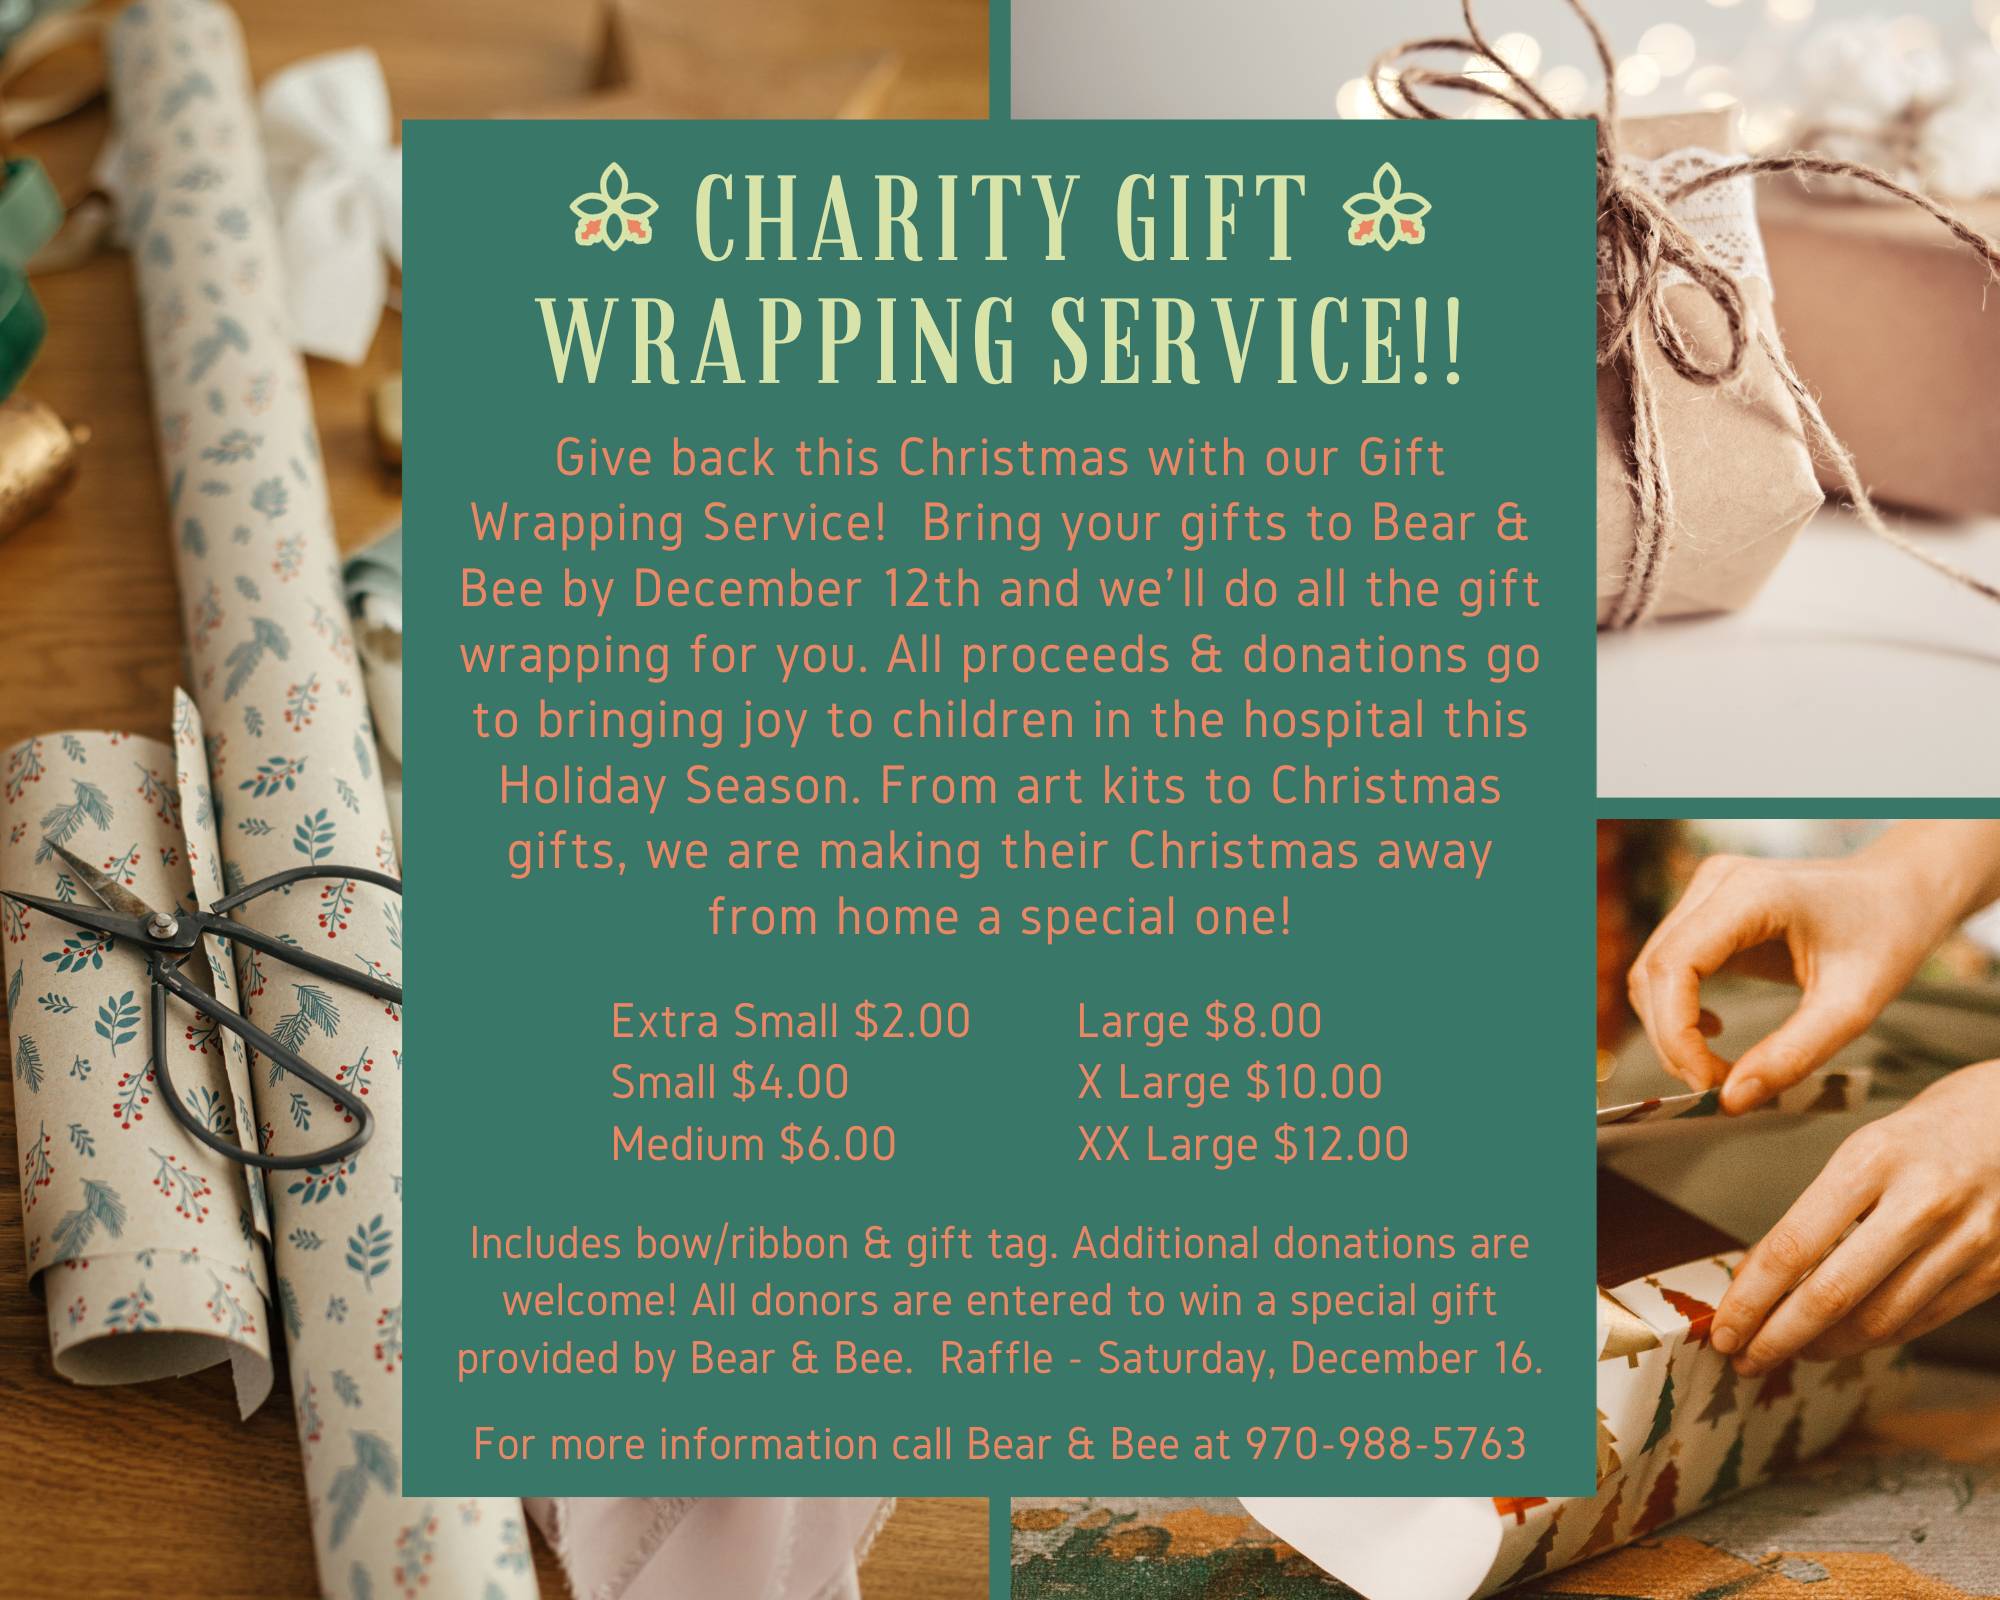 And, it's a wrap! Grangeville woman offers Christmas gift-wrapping